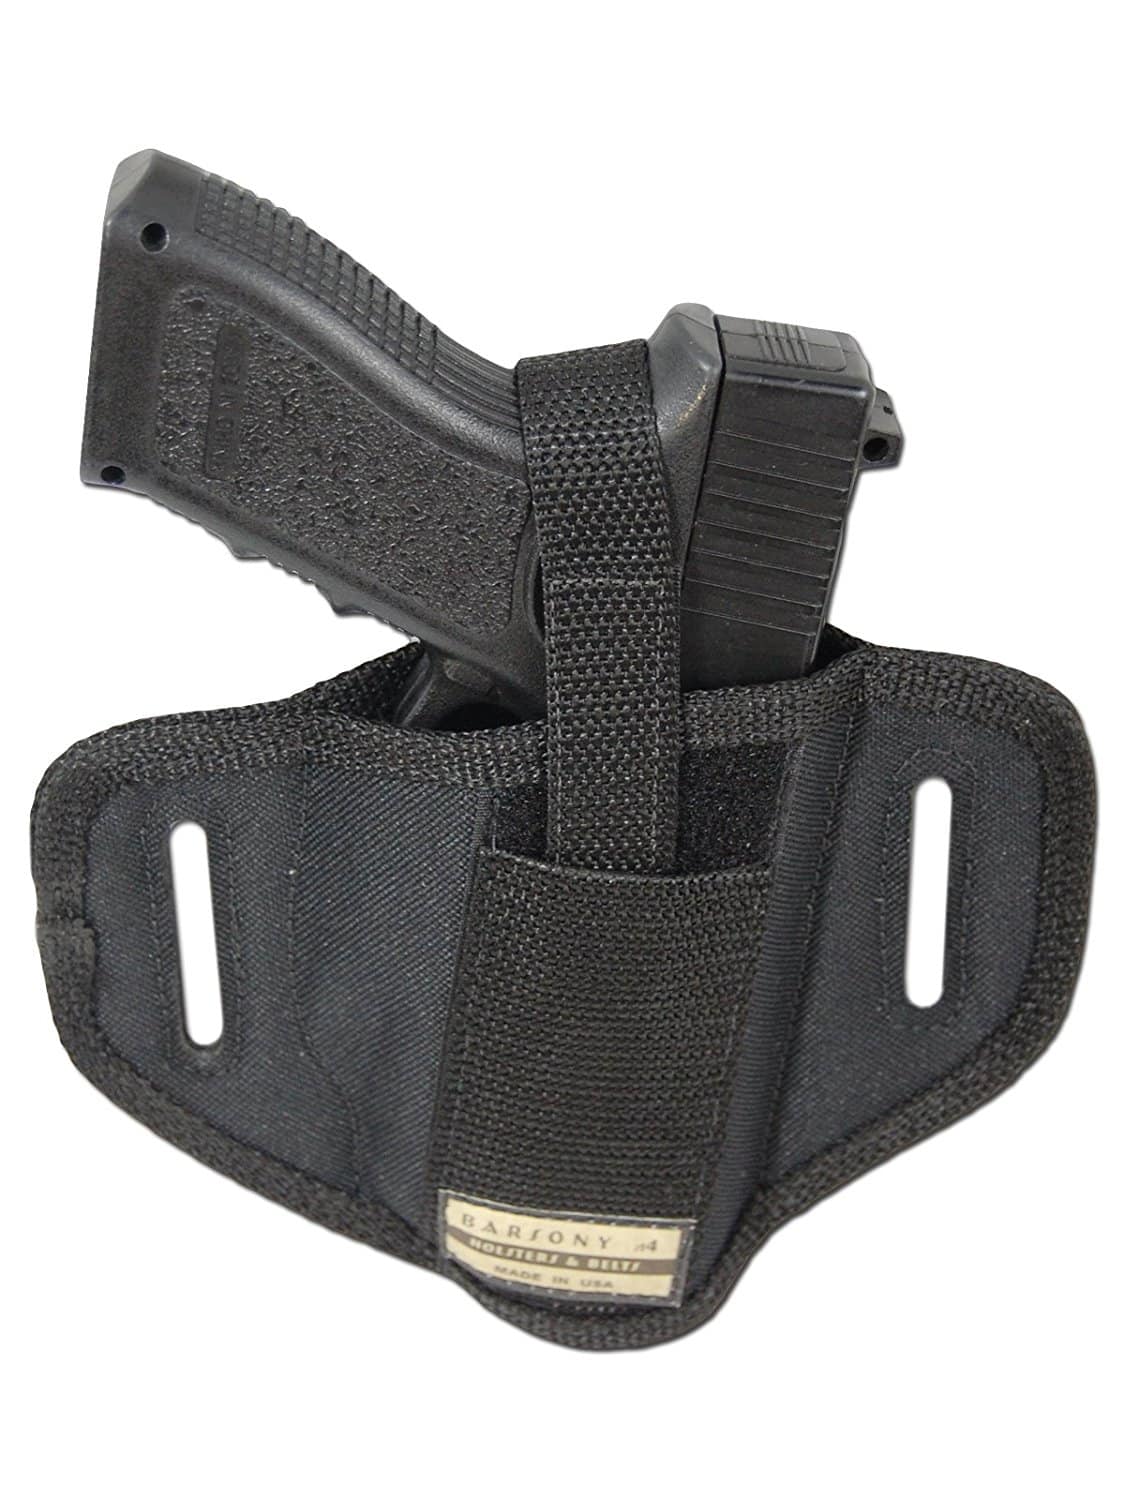  Barsony 6 Position Ambidextrous Concealment Pancake Holster